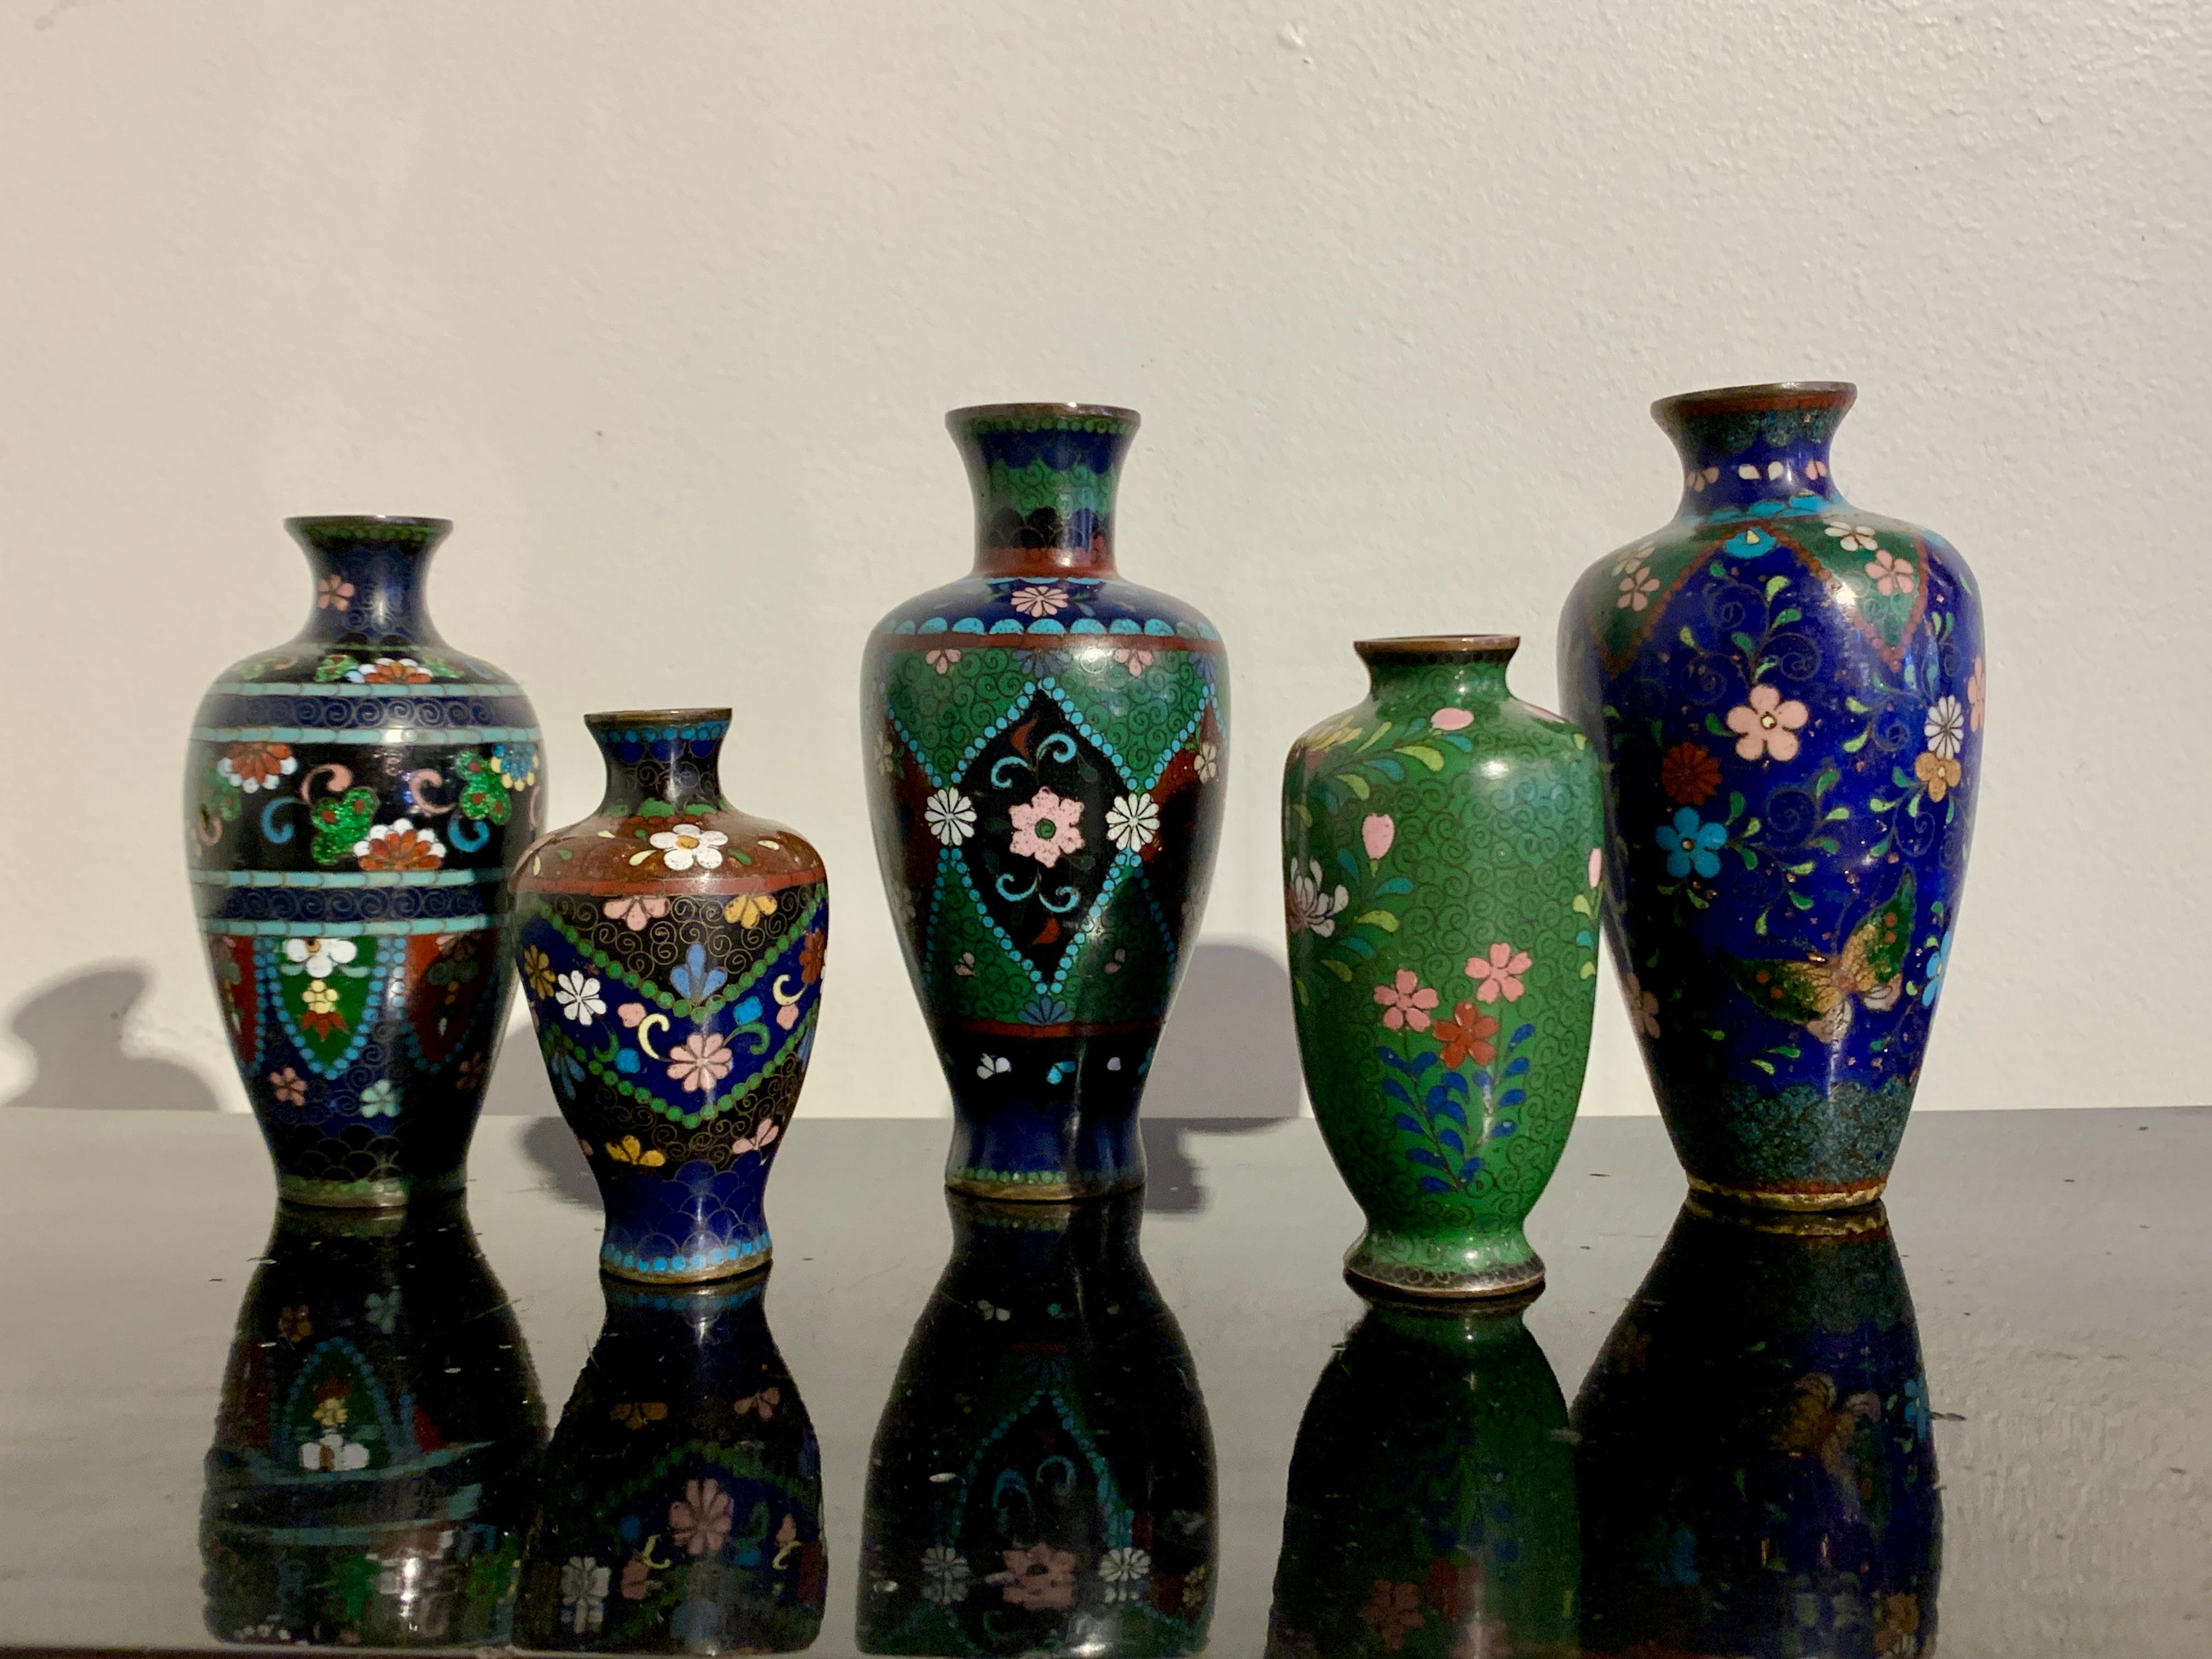 A delightful group of five small Japanese cloisonné vases in various colors and designs, Meiji period, early 20th century, Japan.

The vases all of baluster form and decorated in the cloisonné technique with goldstone highlights. 

Vase 1: Dark blue